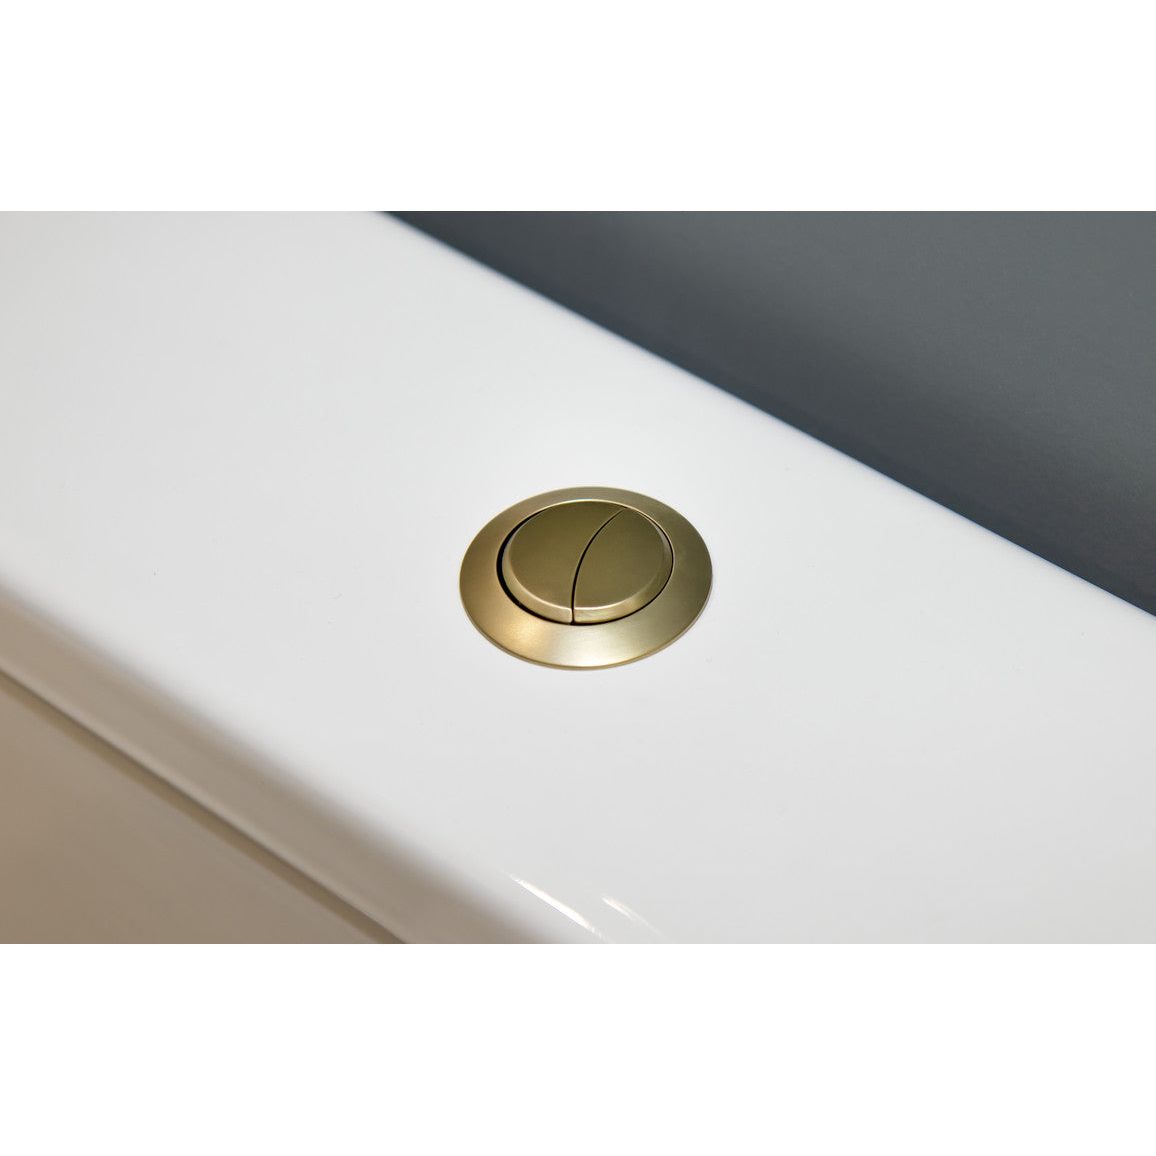 Dual Push Button Cover (Cable) - Brushed Brass